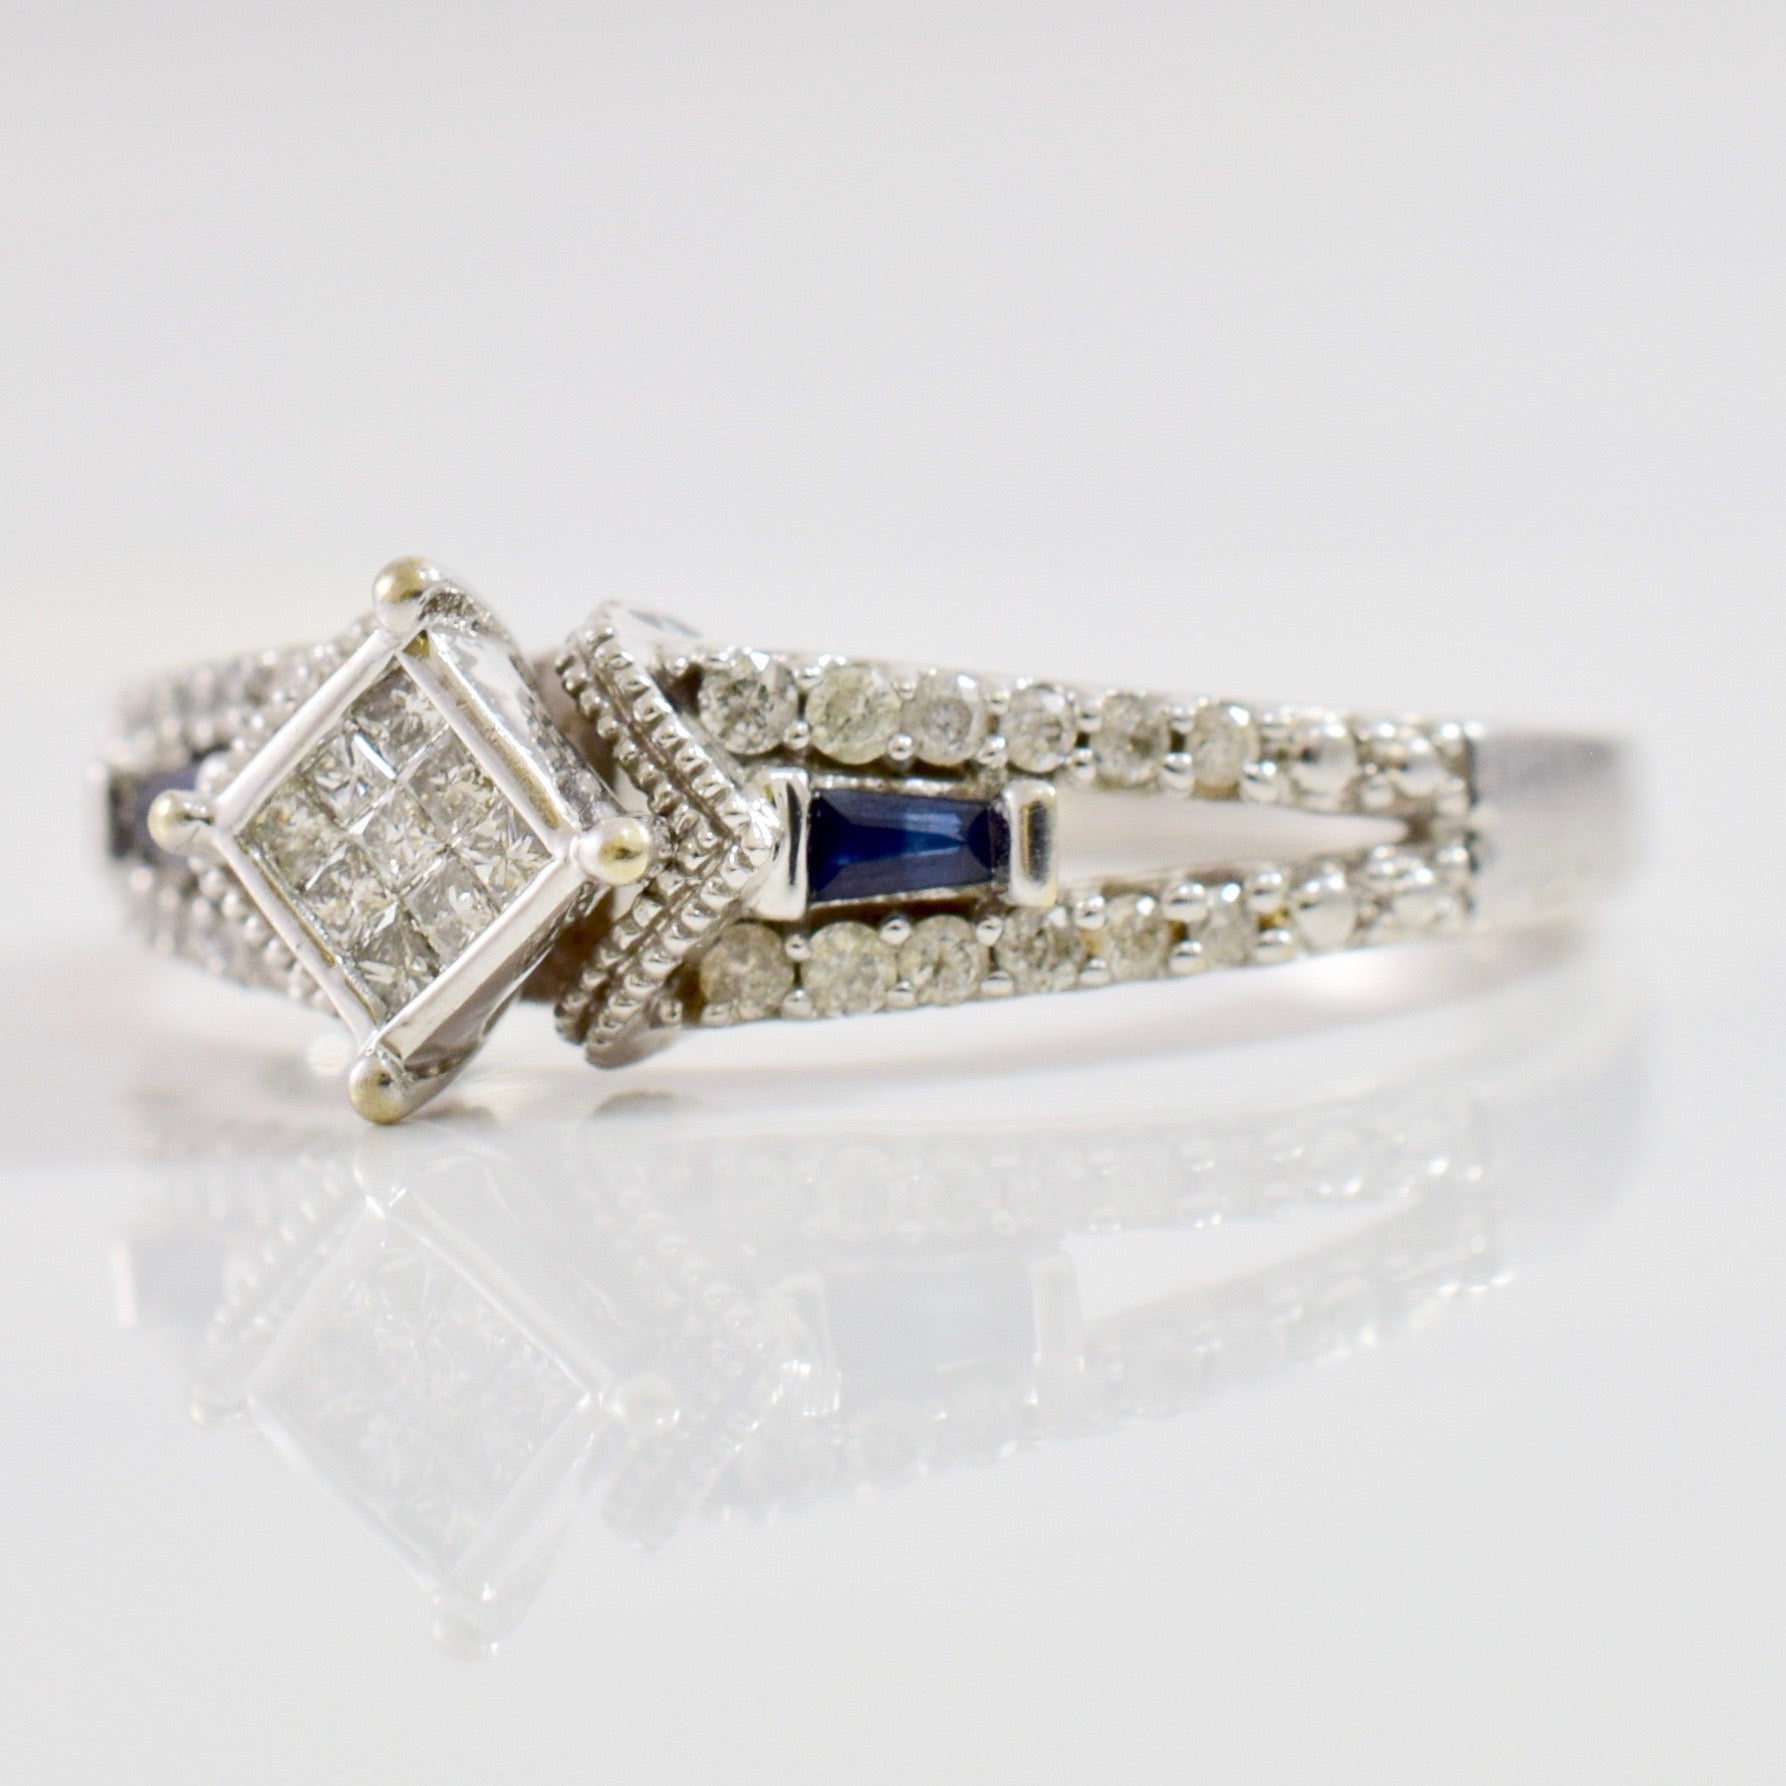 Diamond Cluster Ring with Tiny Sapphire Accents | 0.12 ctw SZ 6 |